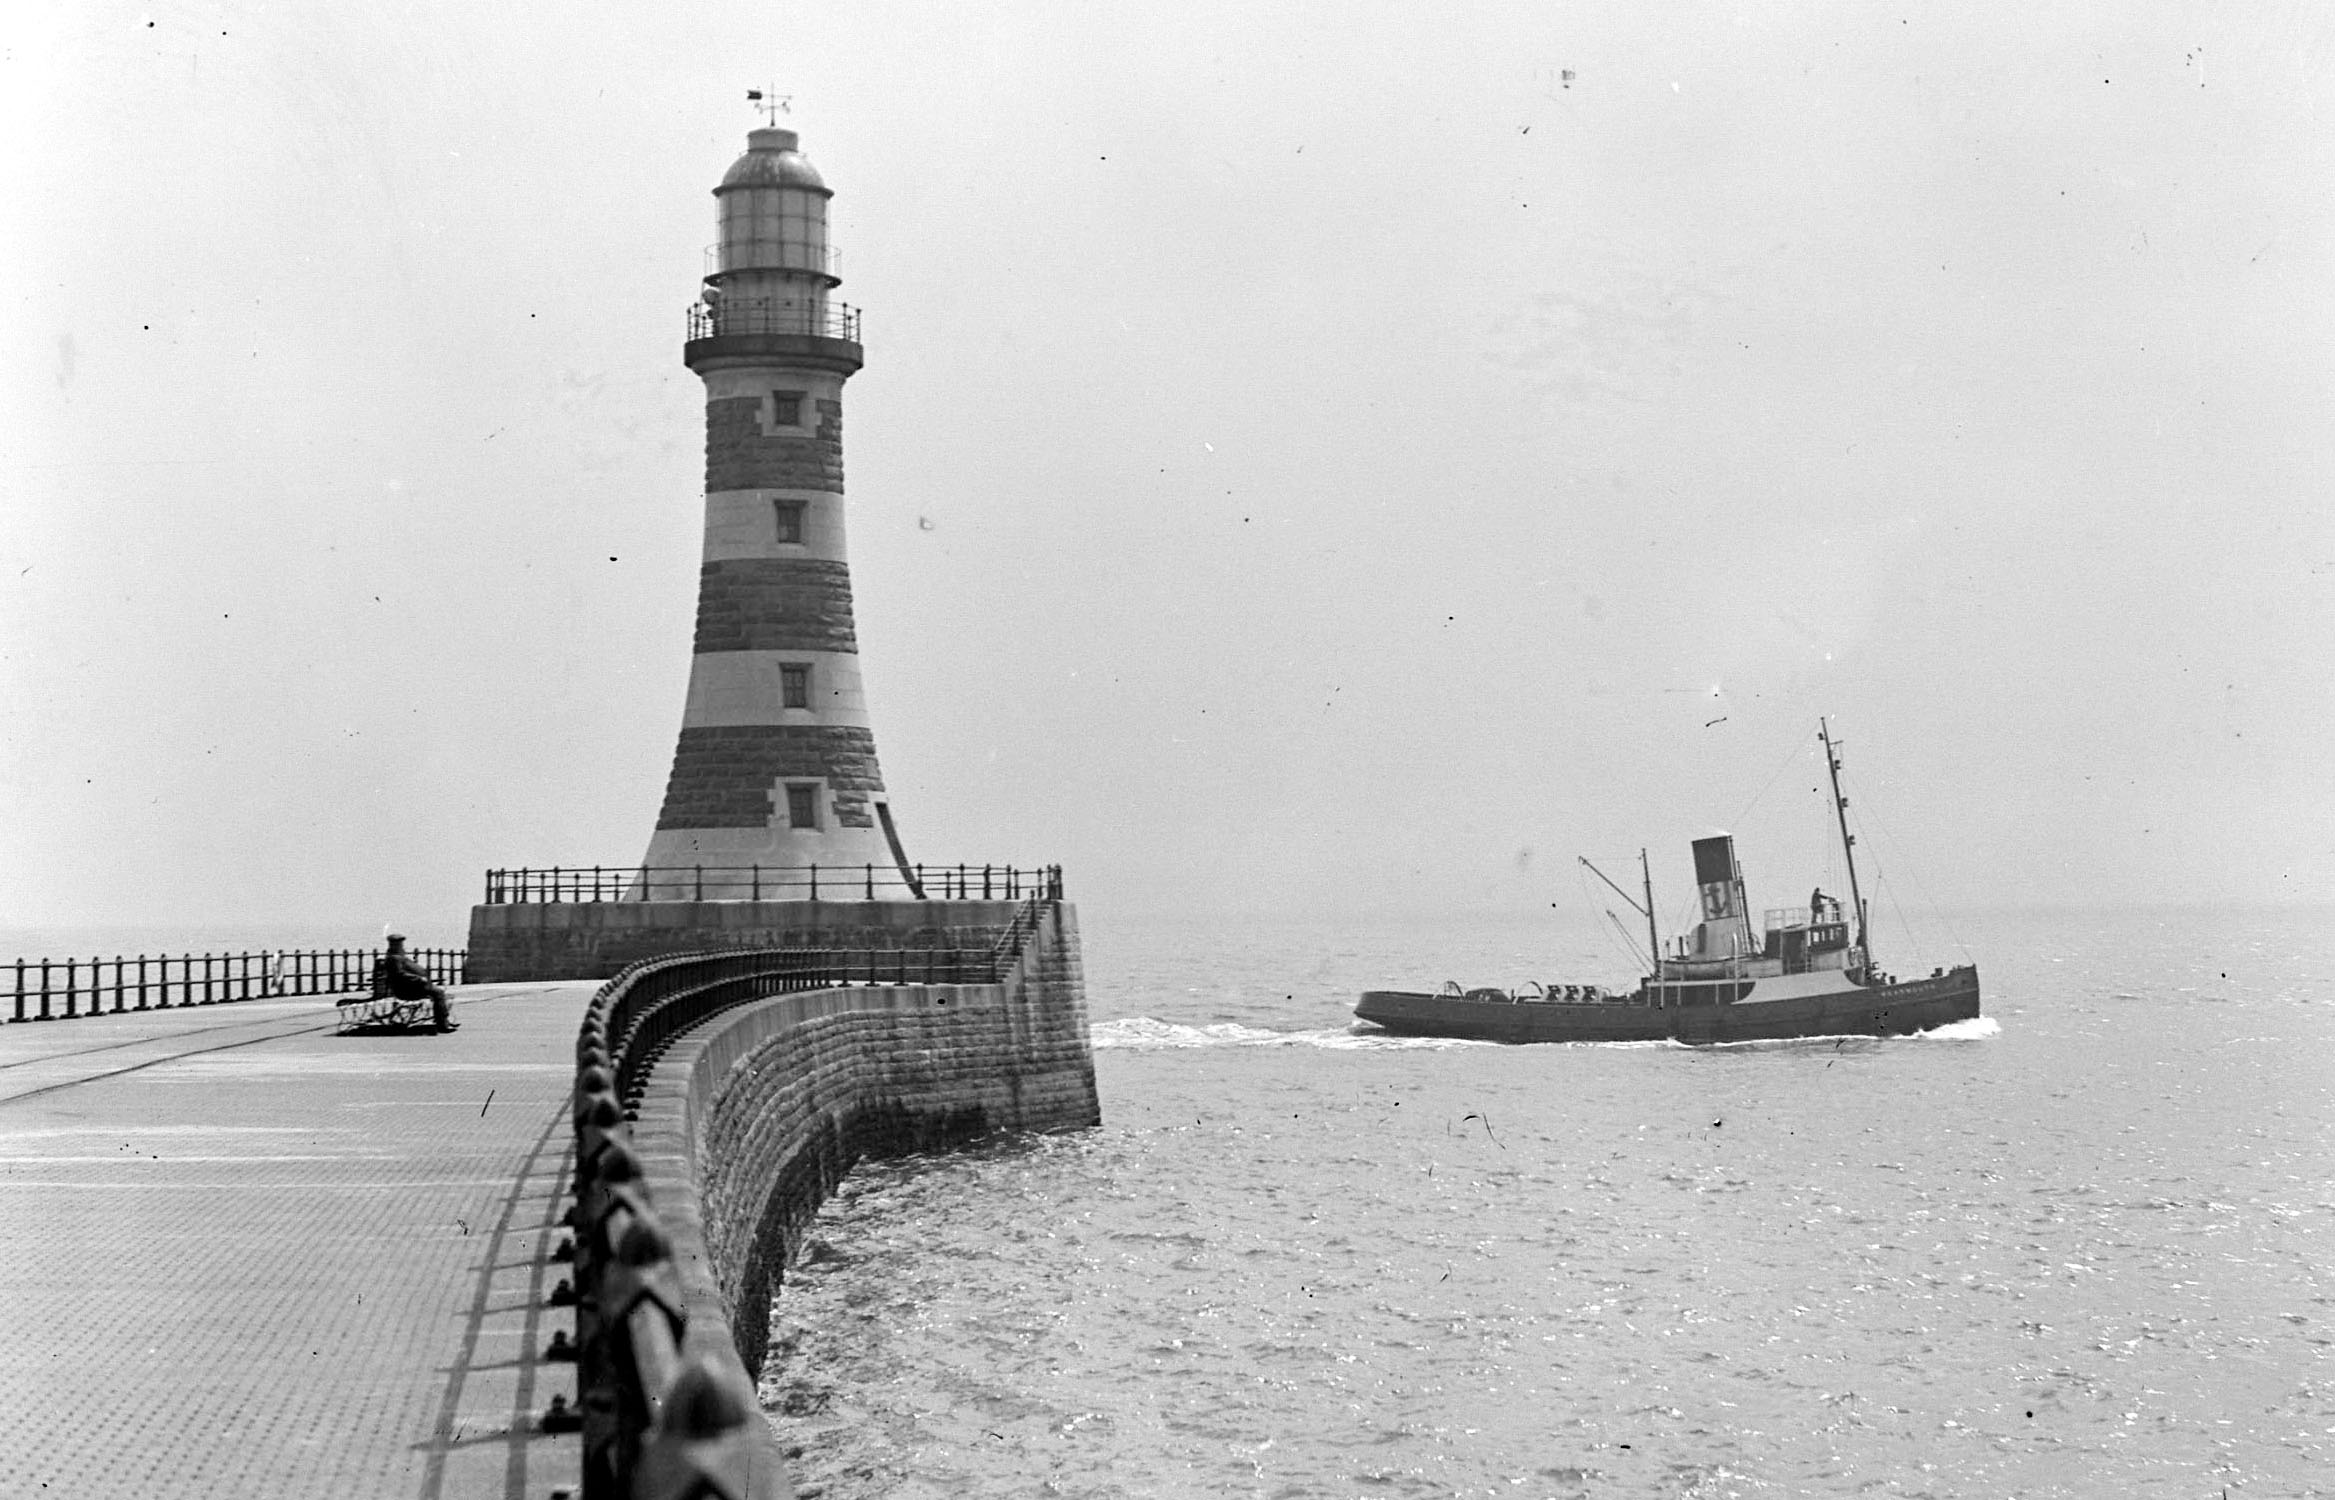 10 THINGS YOU MIGHT NOT KNOW ABOUT ROKER PIER & LIGHTHOUSE